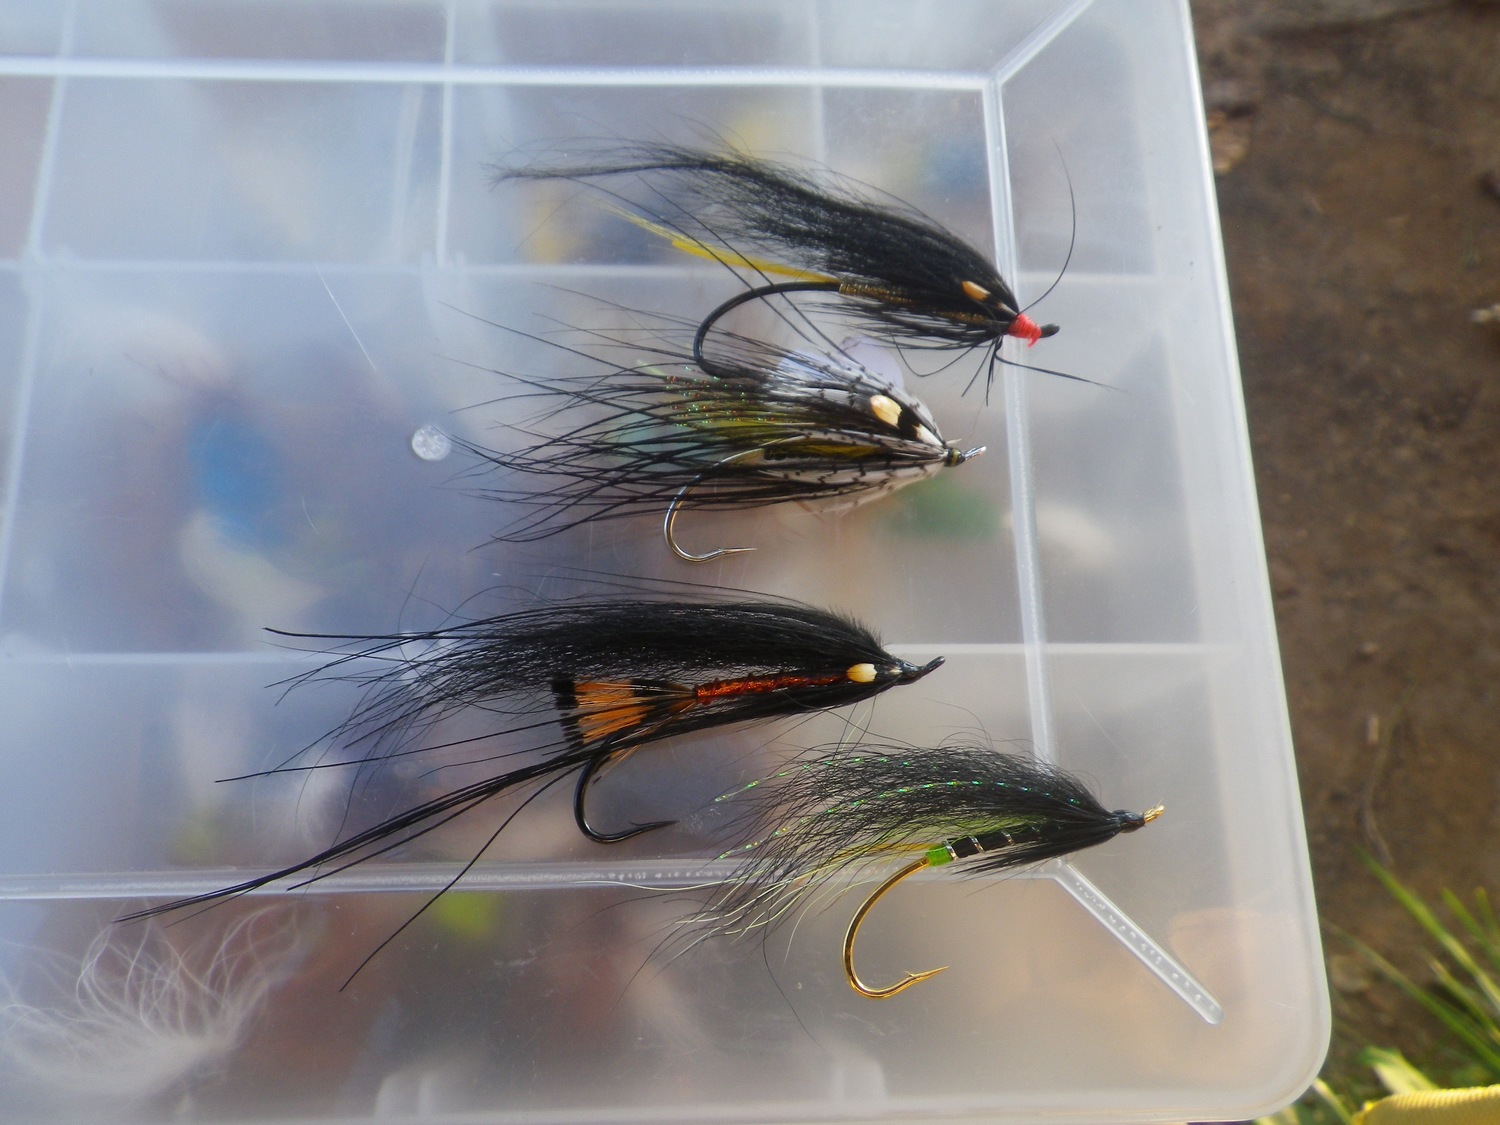 Some classic Salmon flies for this time of year.